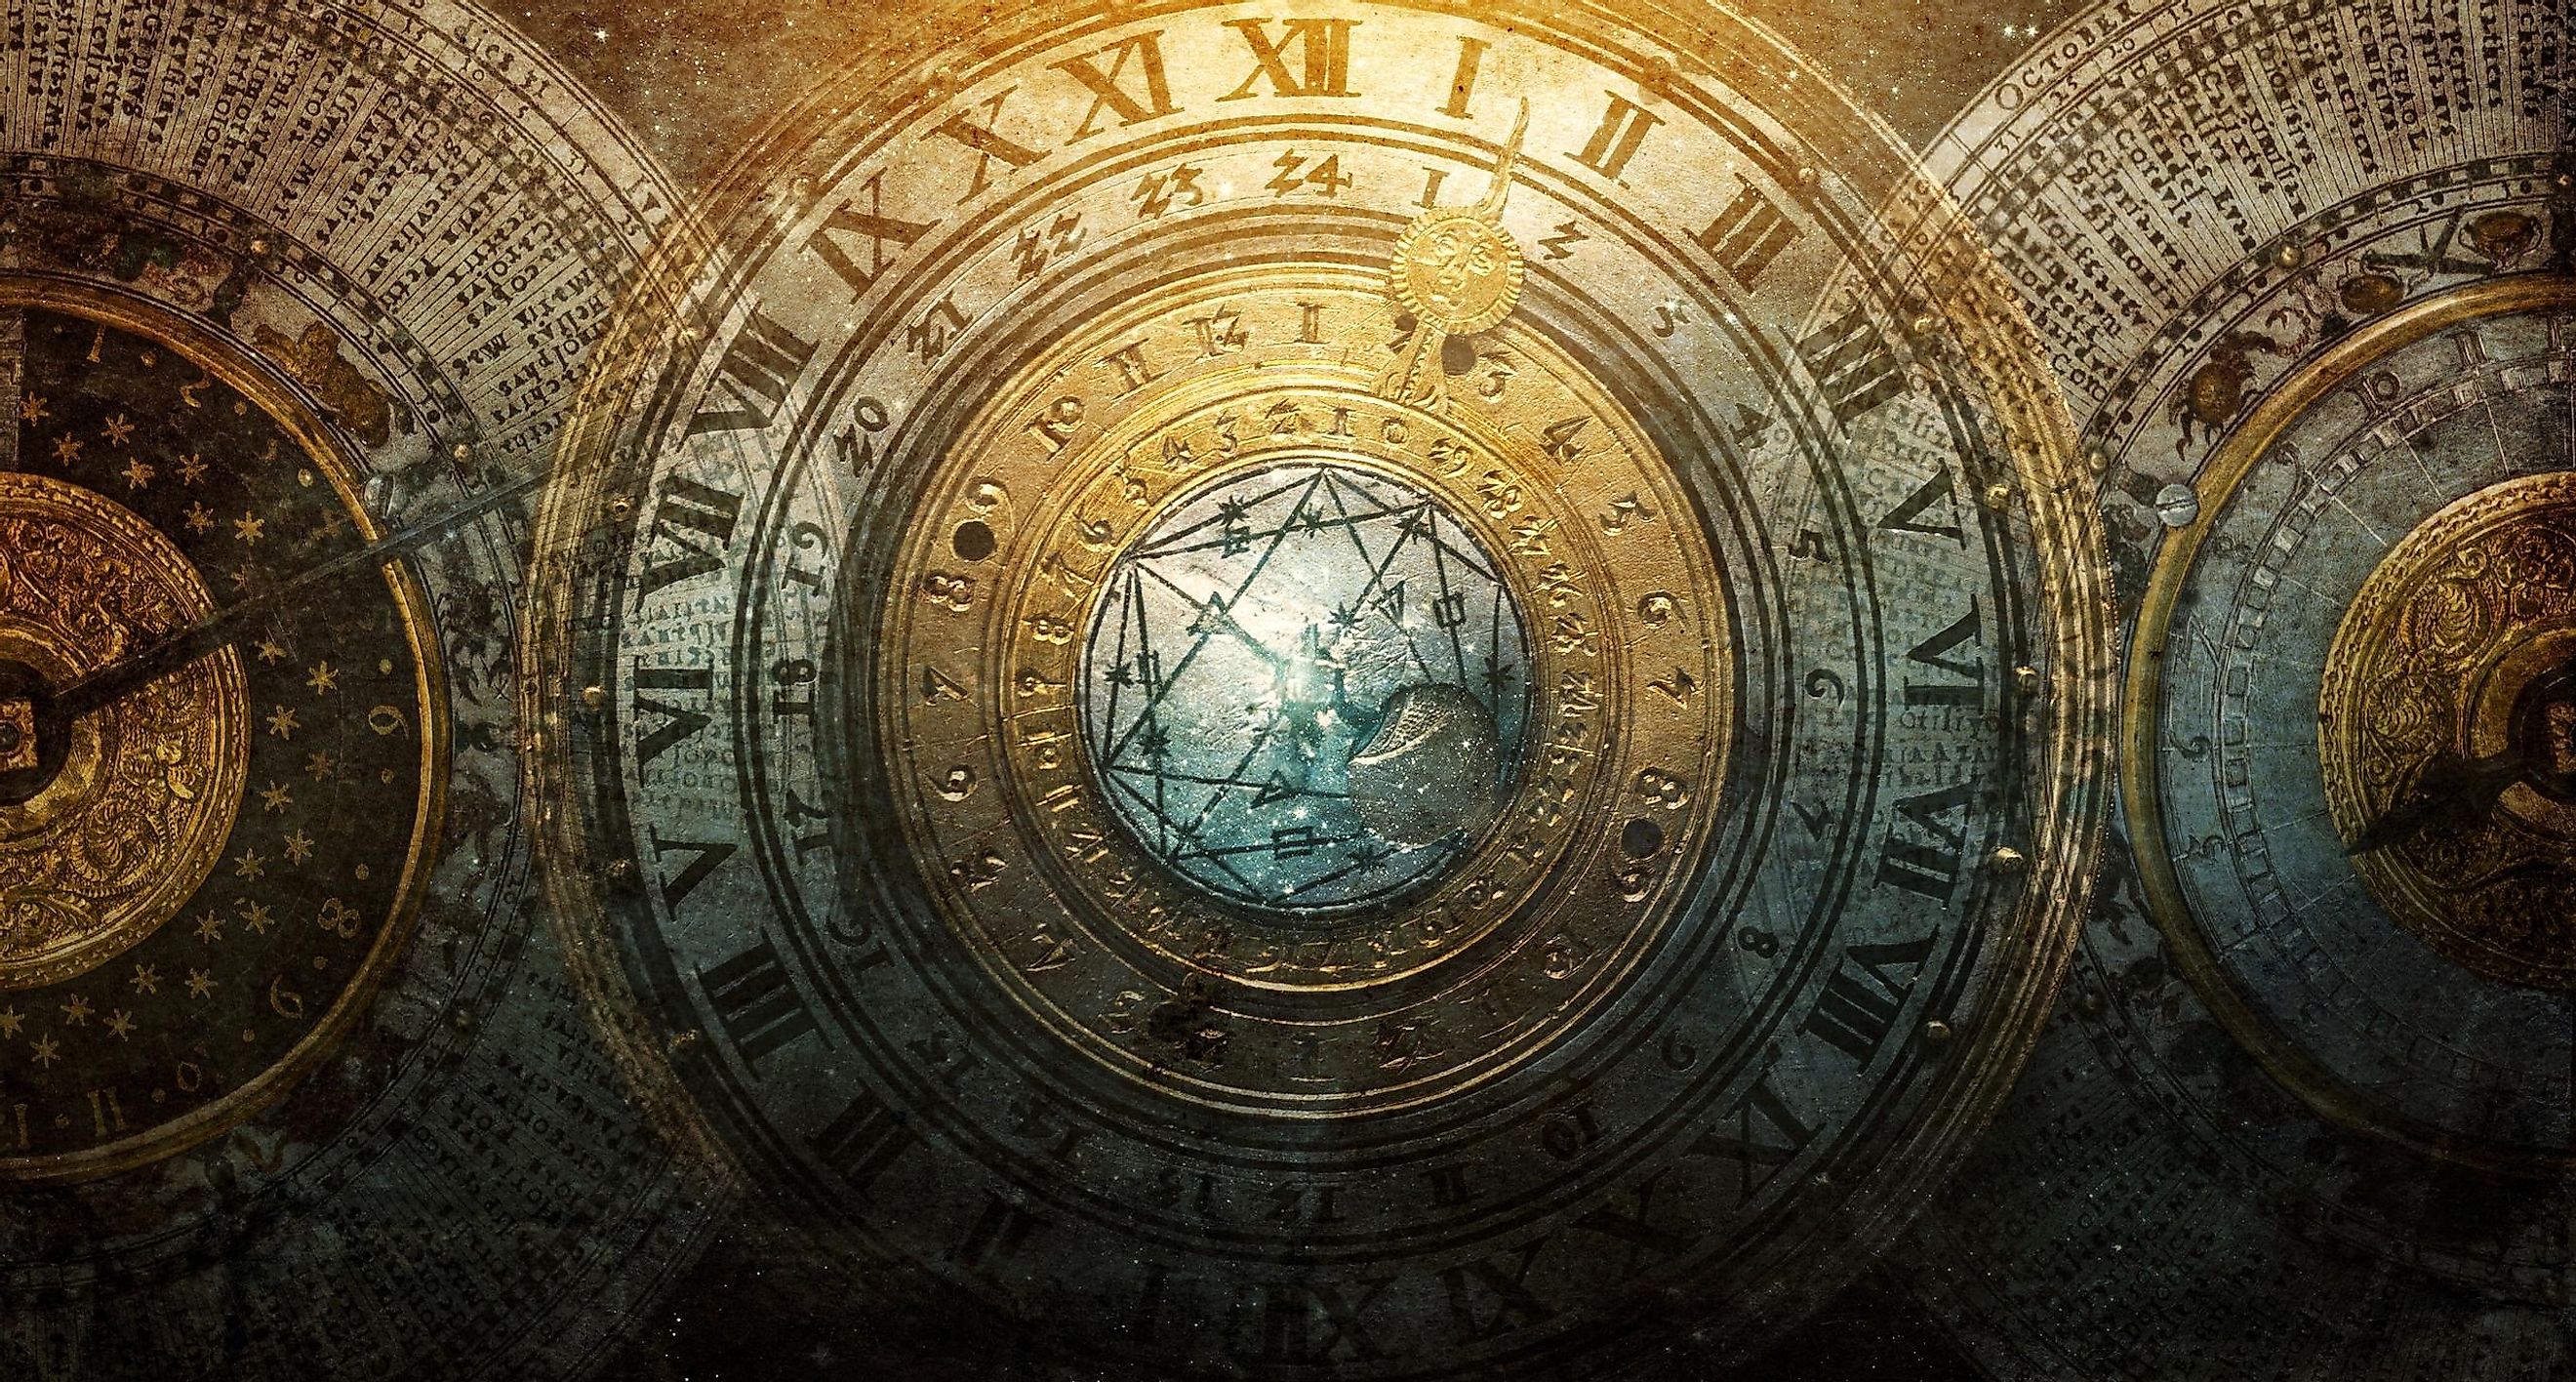 An ancient calendar adorned with constellations and intricate astronomical instruments. This symbolizes various concepts, including science, astronomy, astrology, mystery, education, mysticism, numerology, occultism, divination, and philosophy.